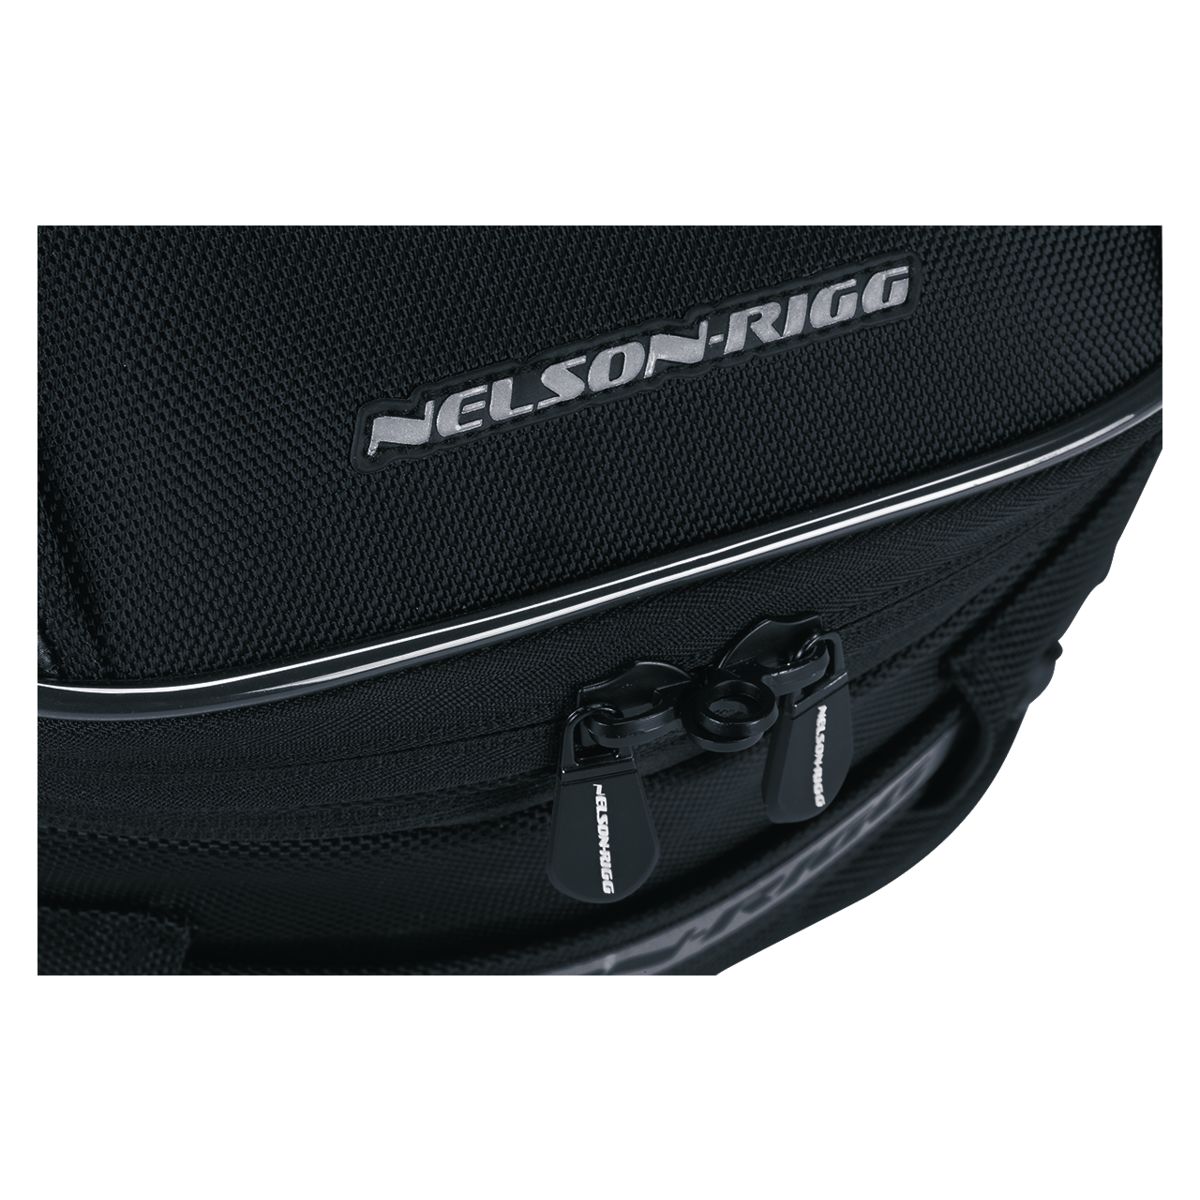 Nelson-Rigg CL-1060-ST2 Commuter Touring Tail/Seat Bag